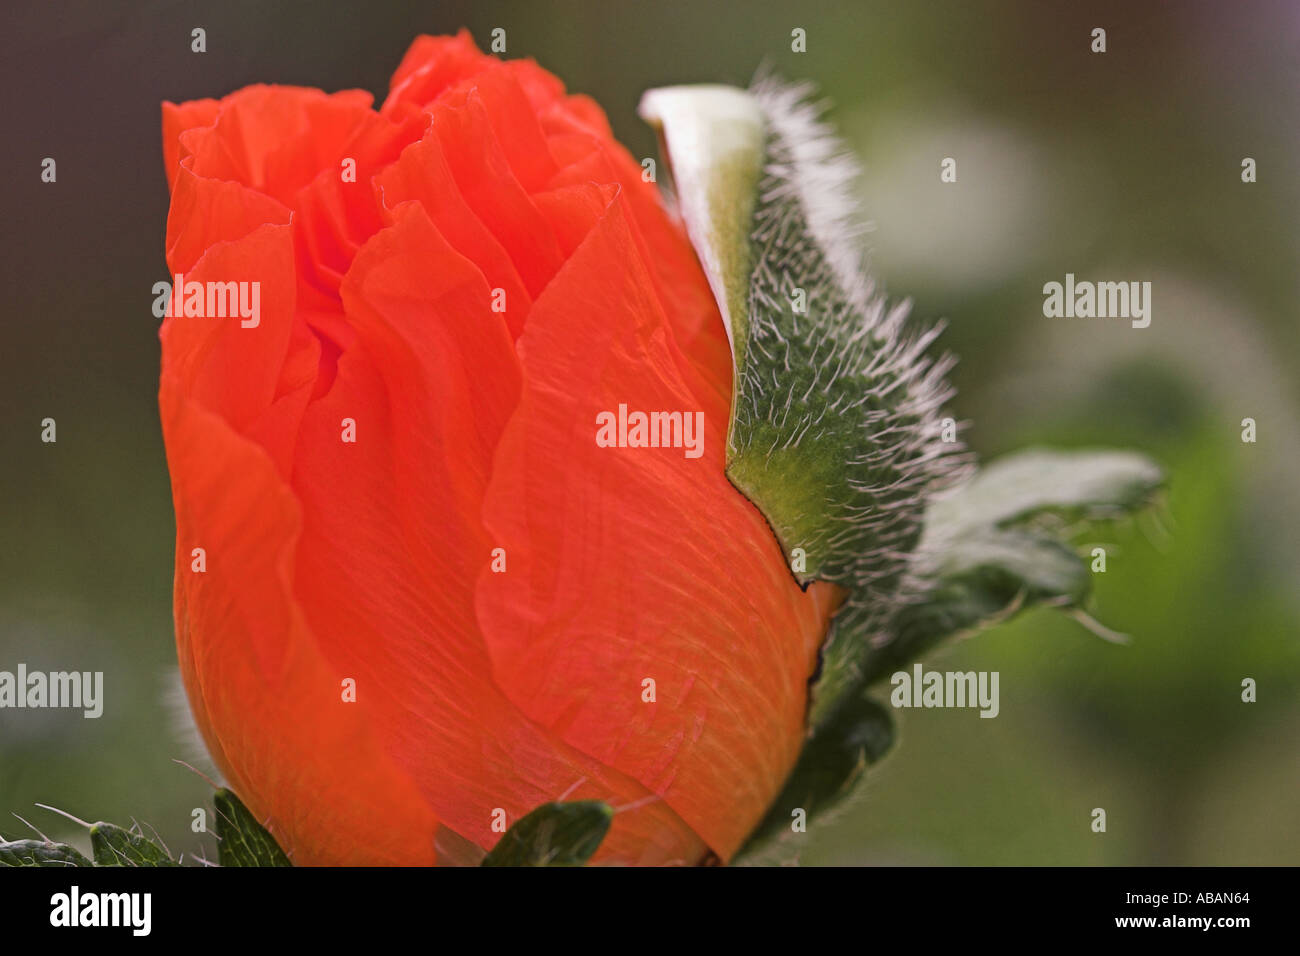 Artistic creative abstract image of a poppy Stock Photo